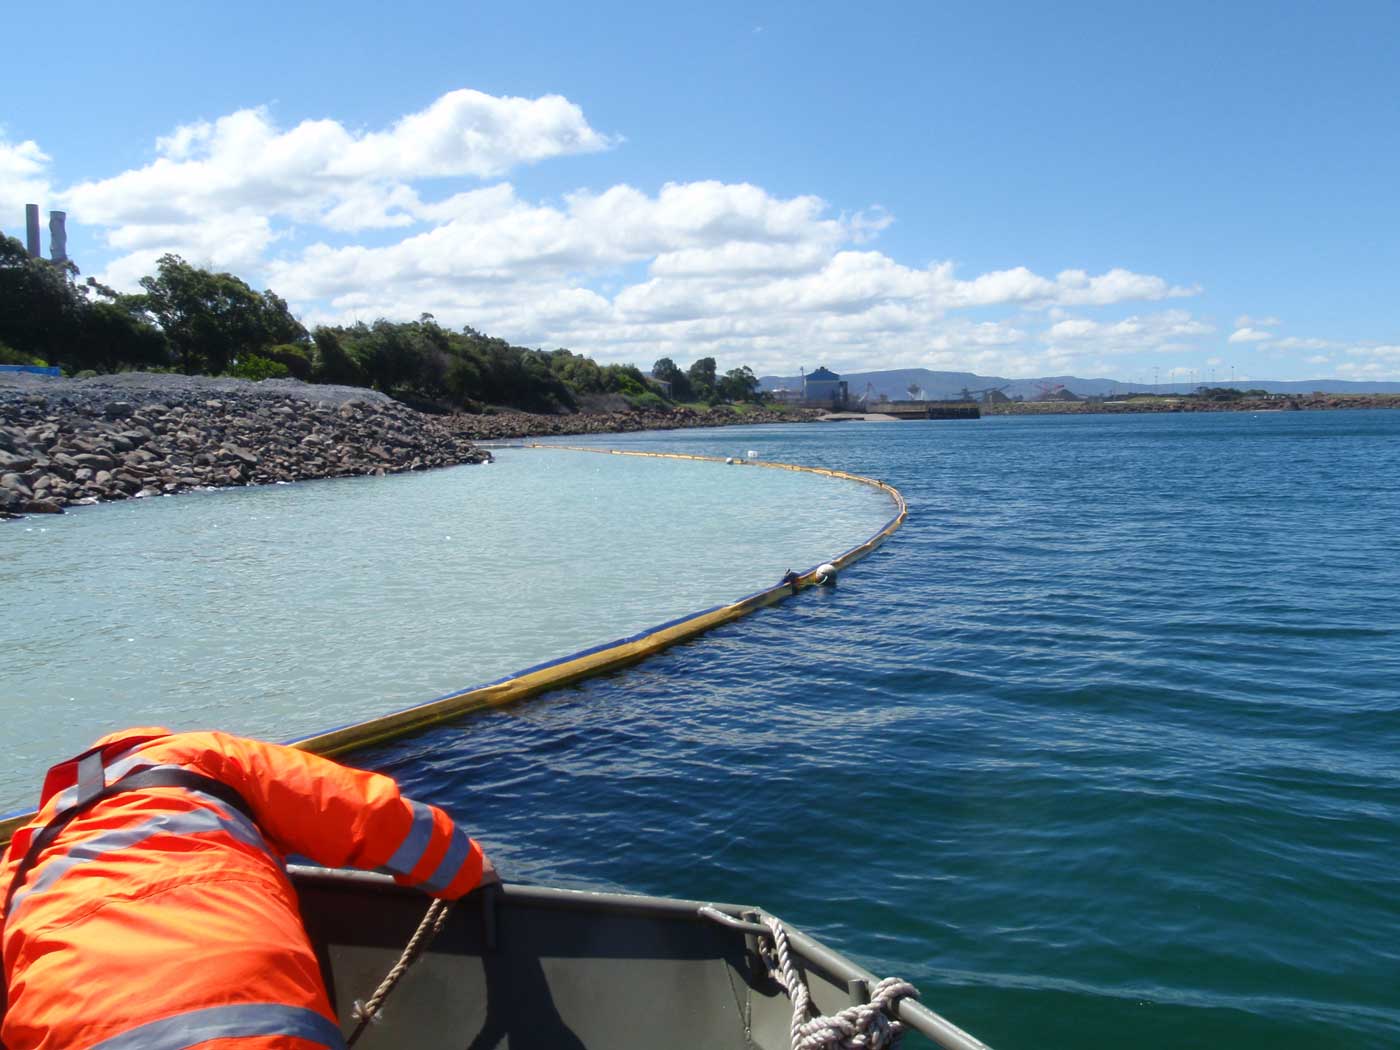 Chatoyer silt curtain installed in Port Kembla for dredging and reclamation works